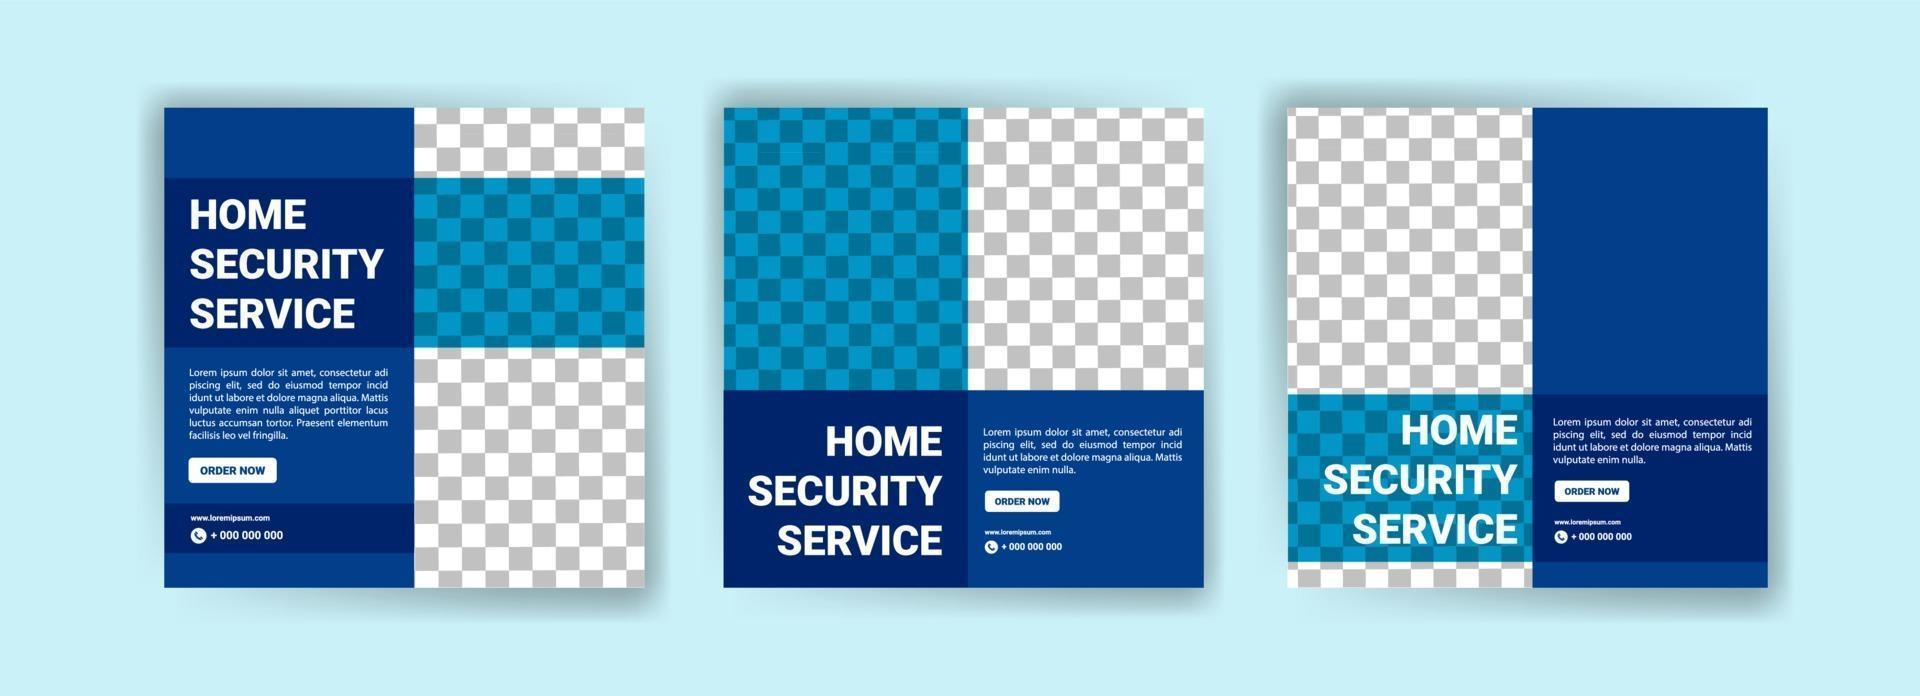 Home security service. Social media post for IoT business. vector